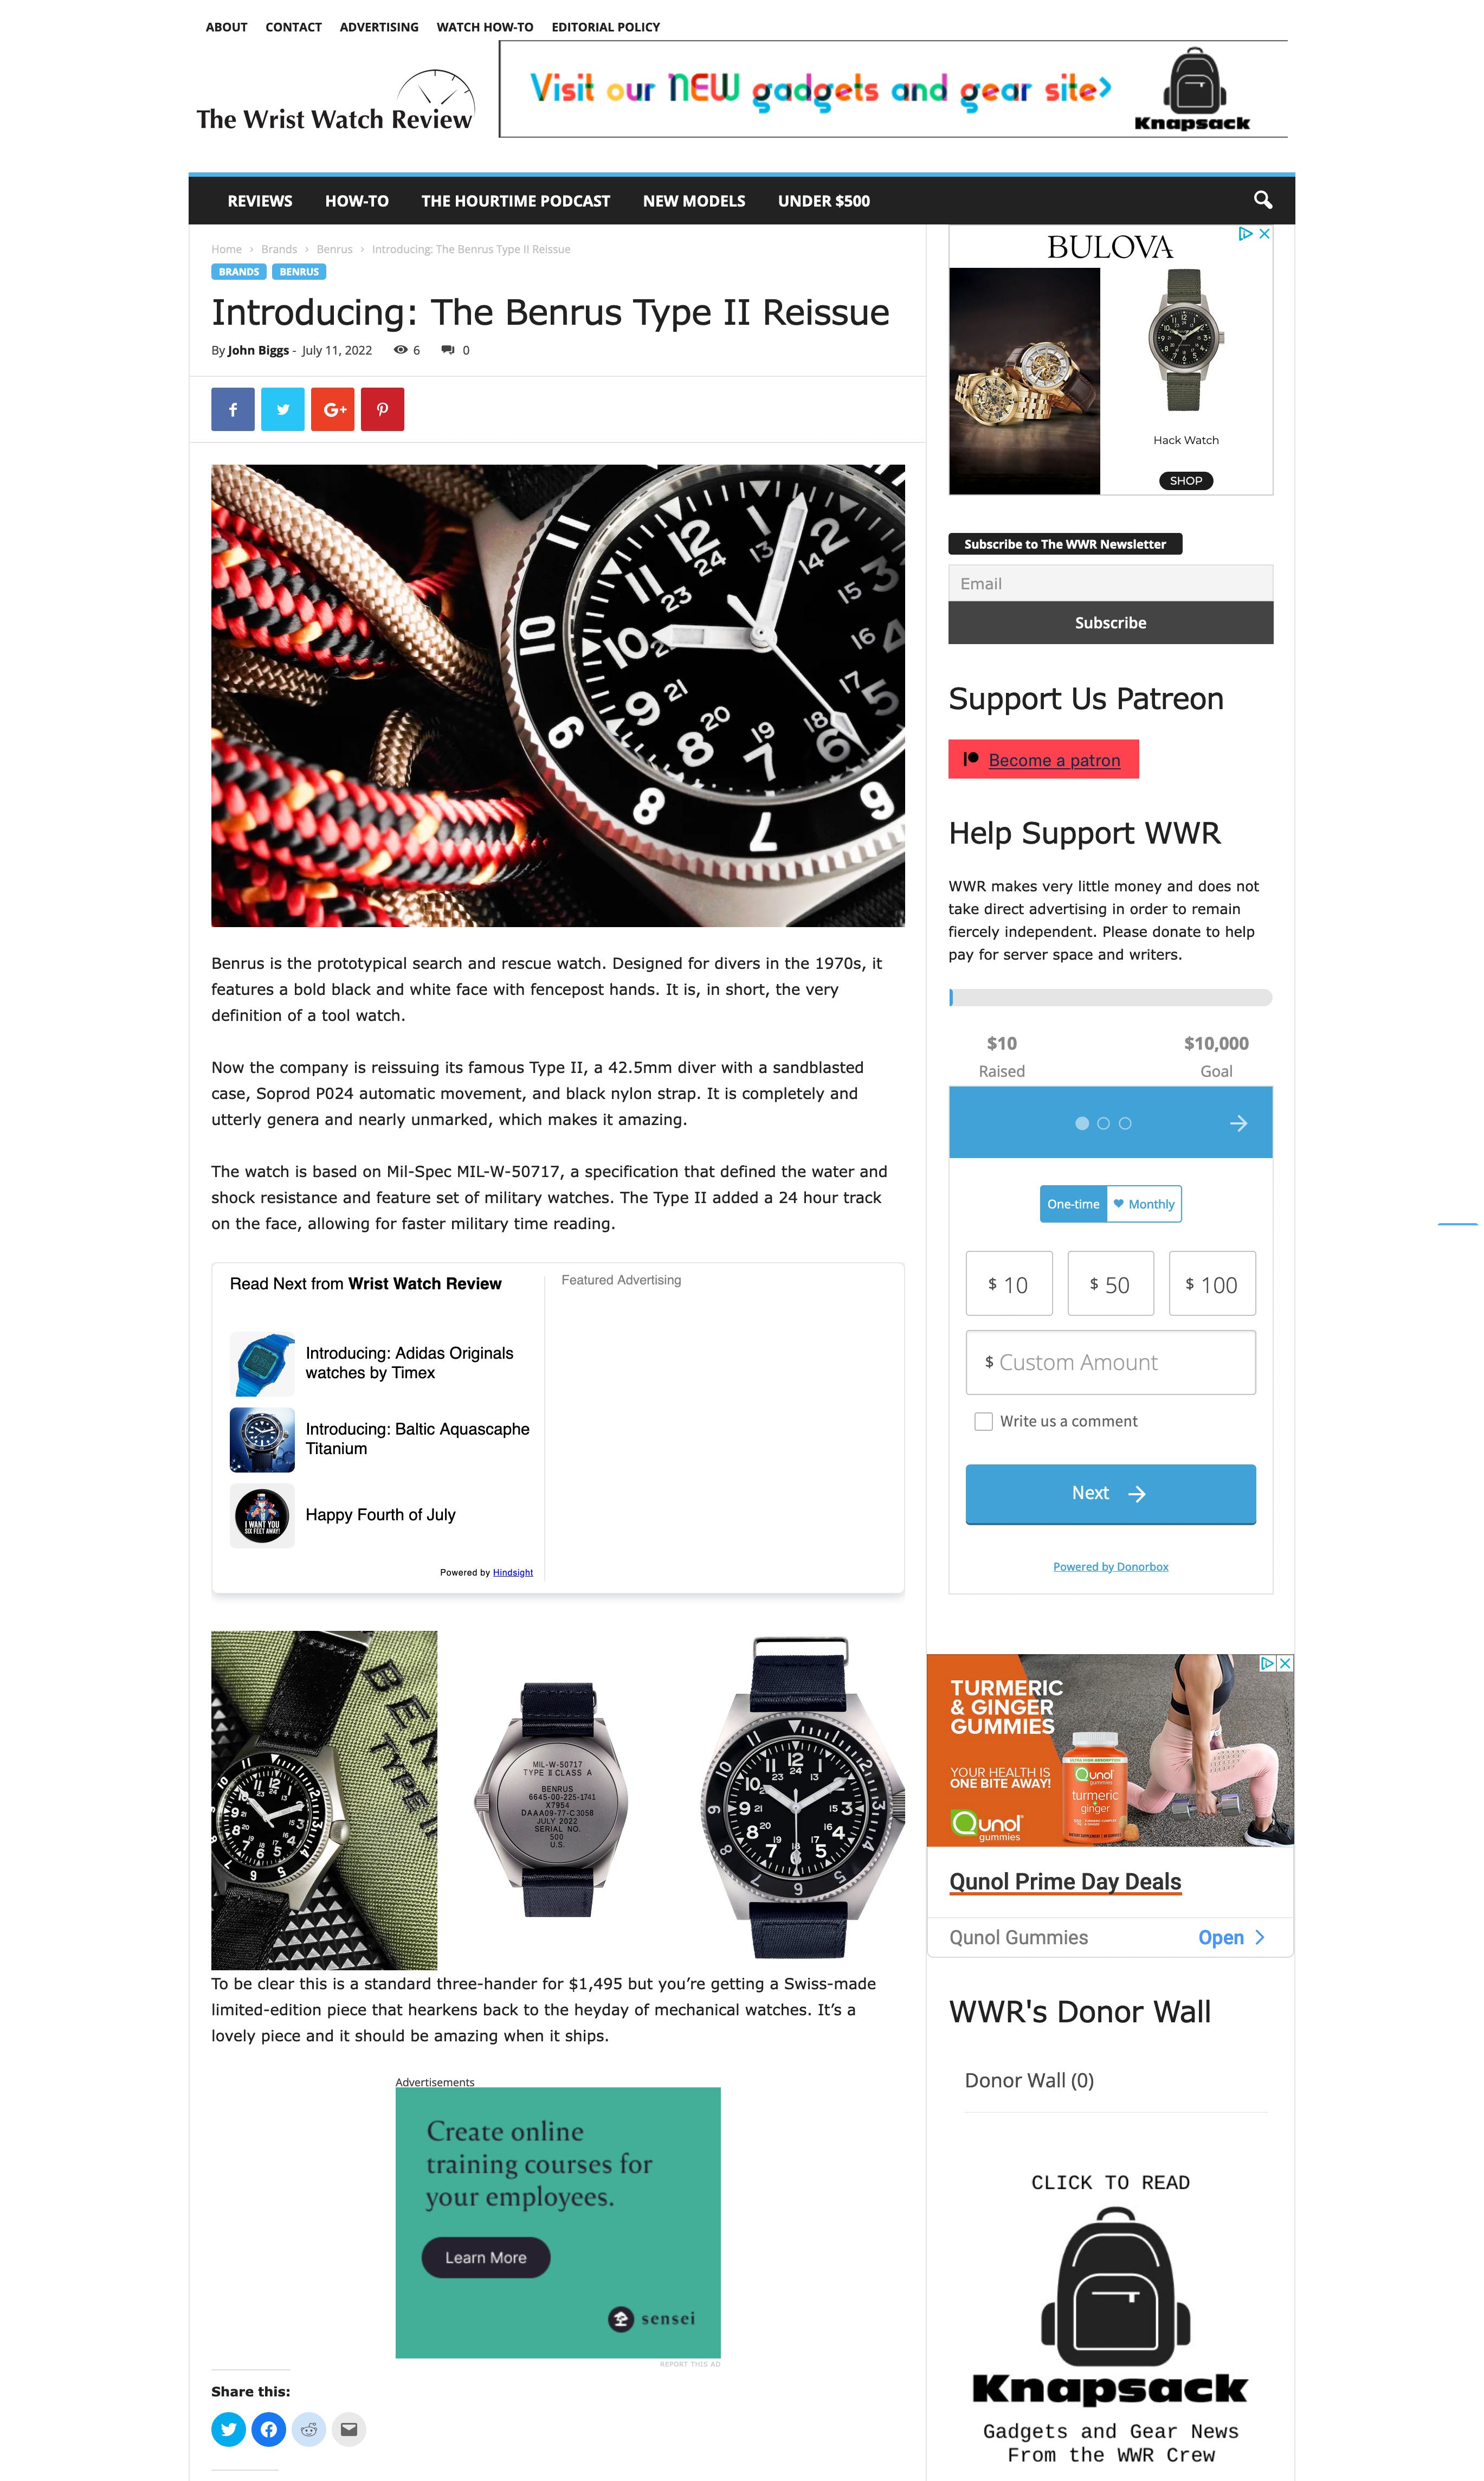 THE WRIST WATCH REVIEW